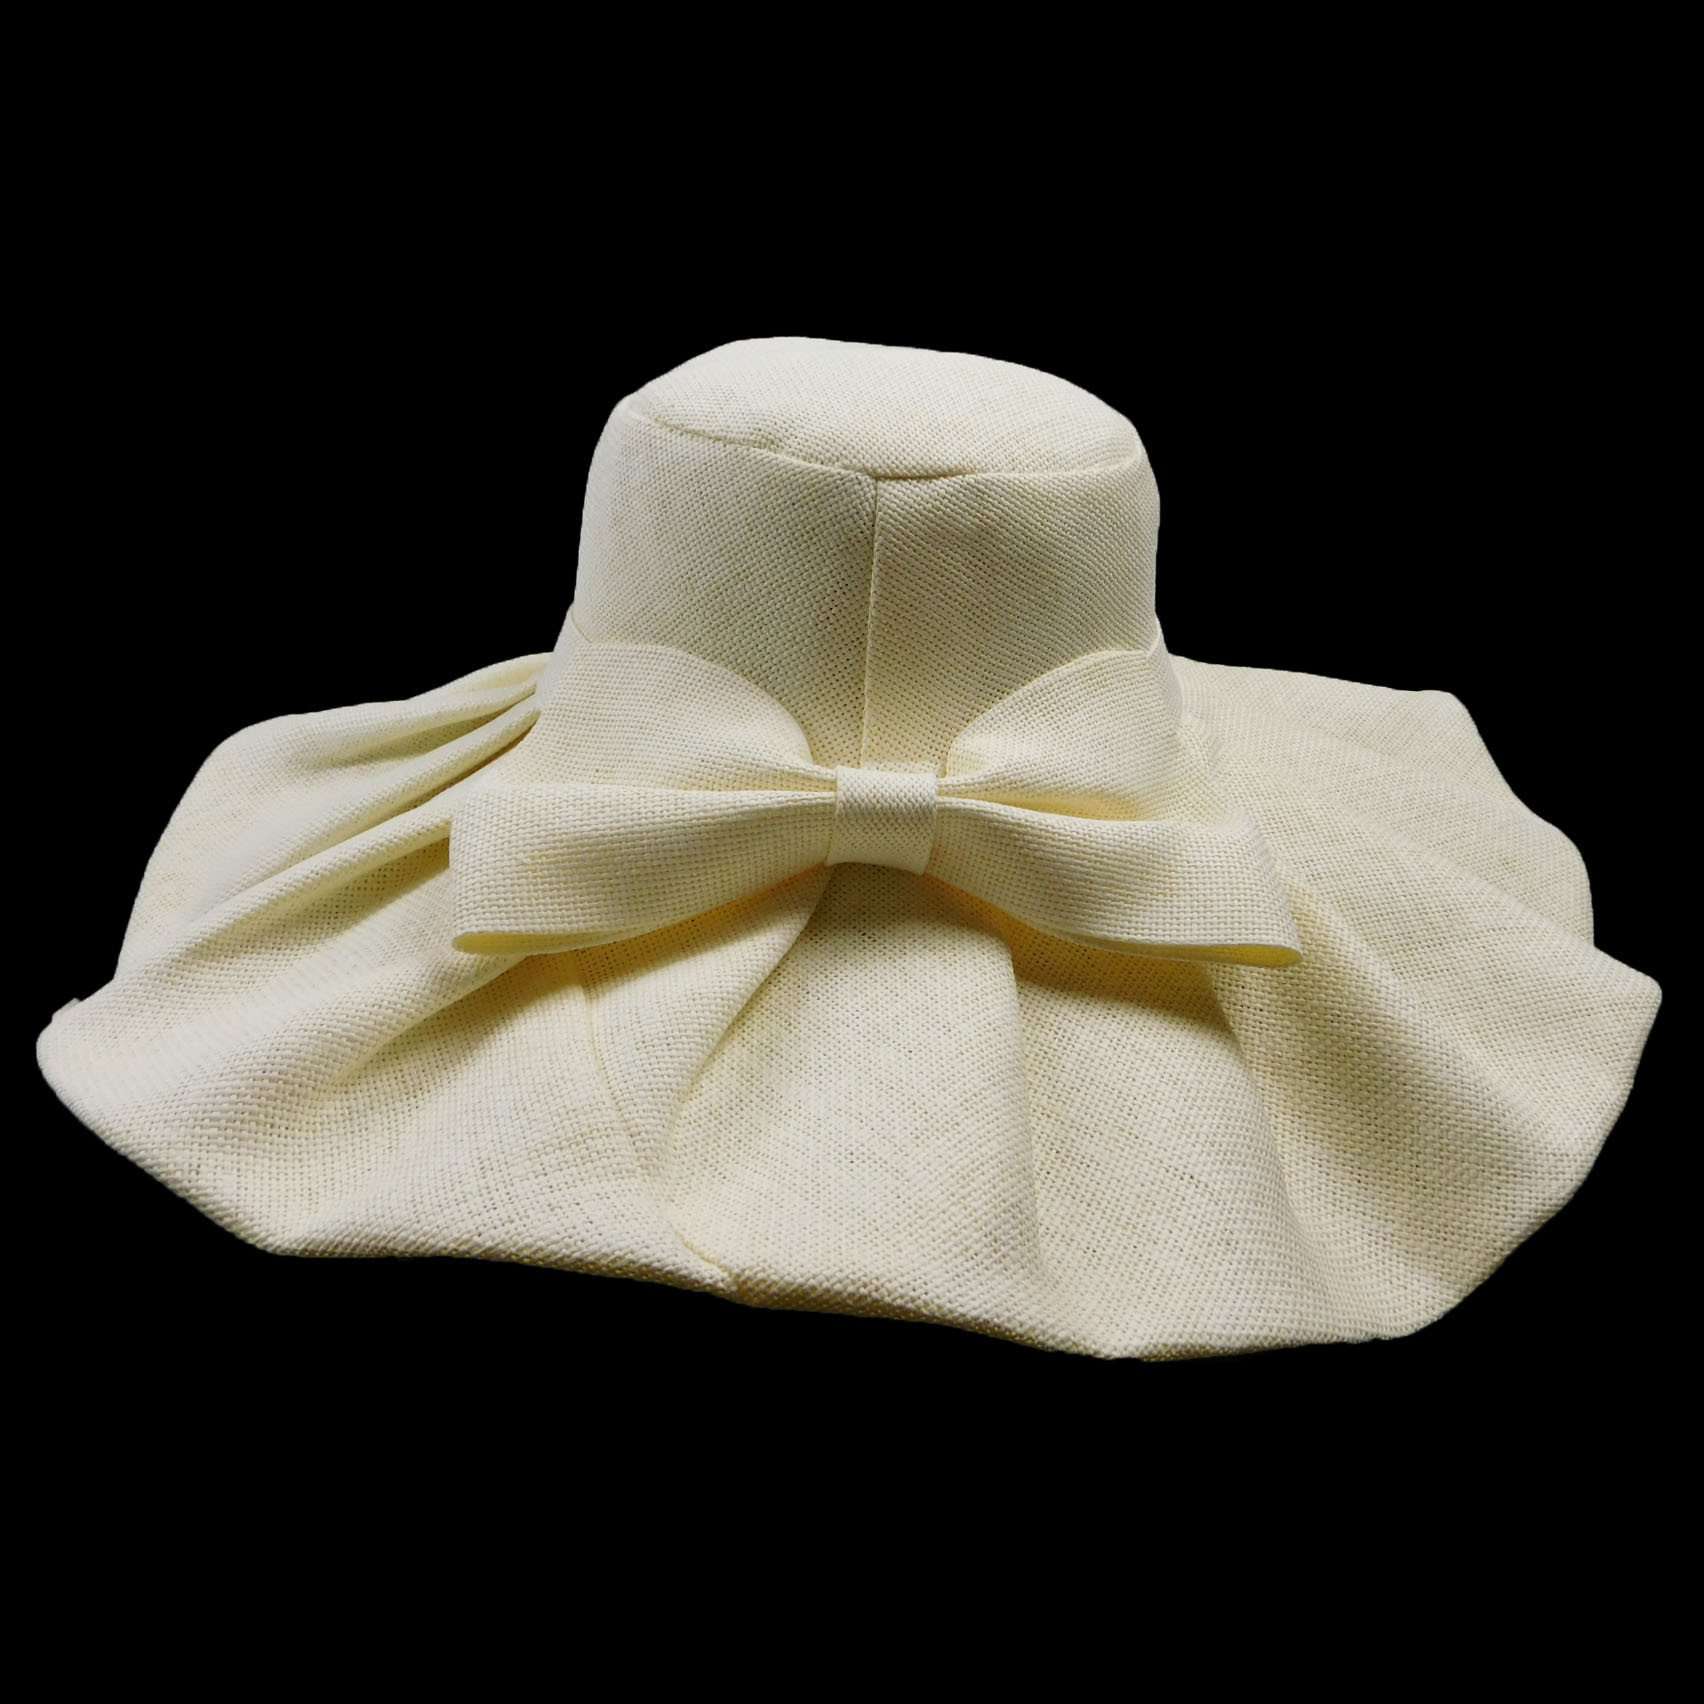 Classy Sun Hat with Large Bow - Jeanne Simmons Hats, Wide Brim Sun Hat - SetarTrading Hats 